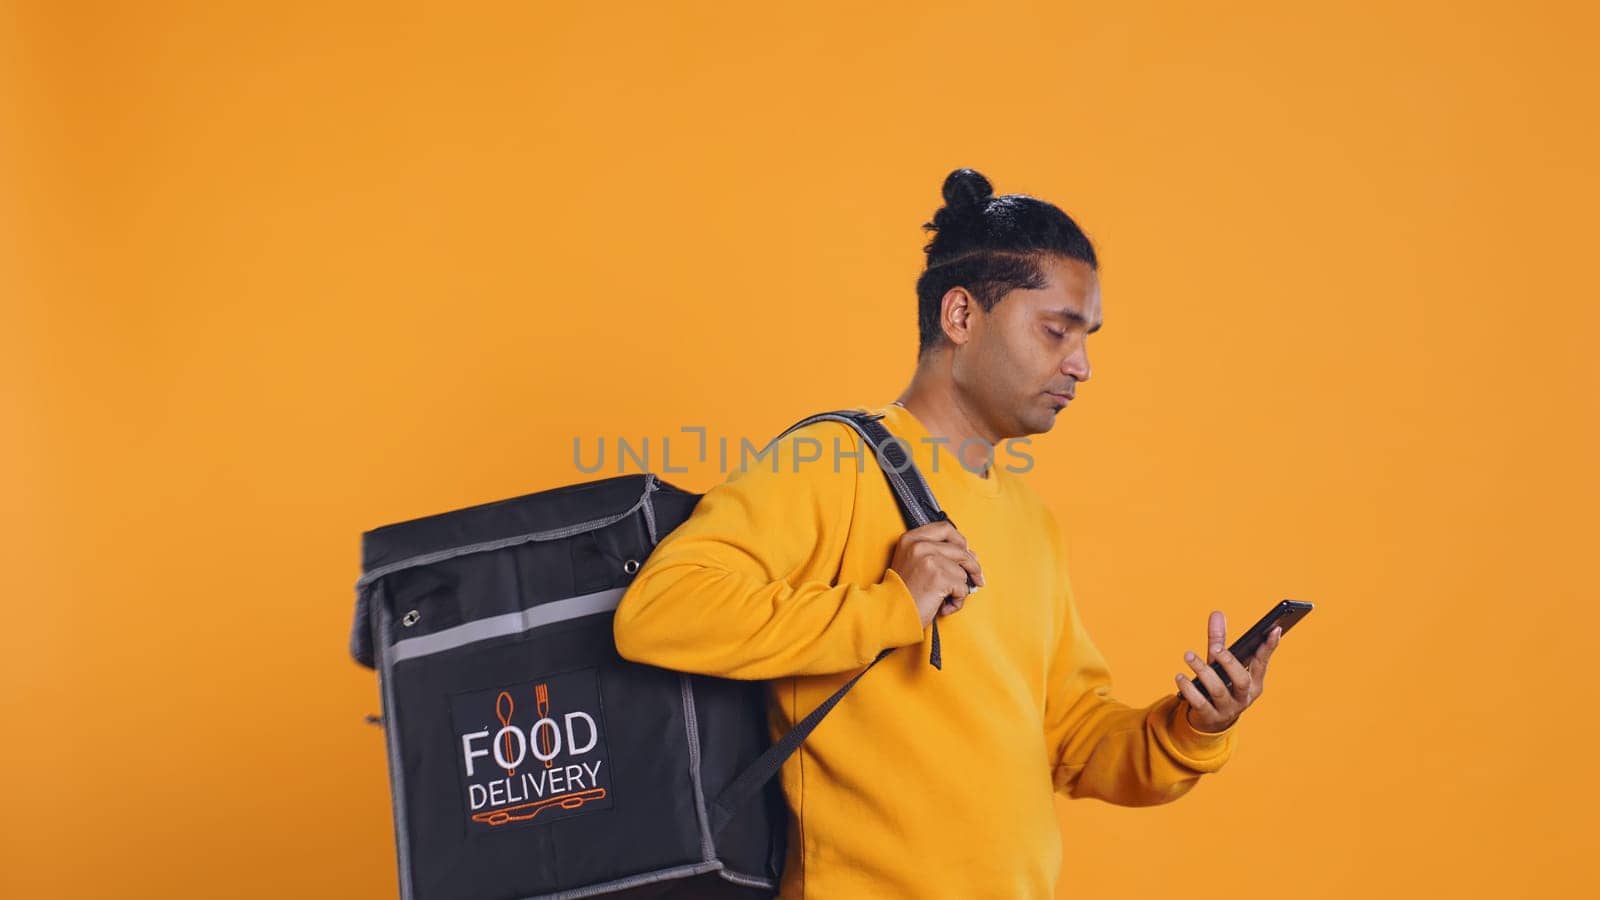 Man doing food delivery answering phone, fulfilling clients orders by DCStudio